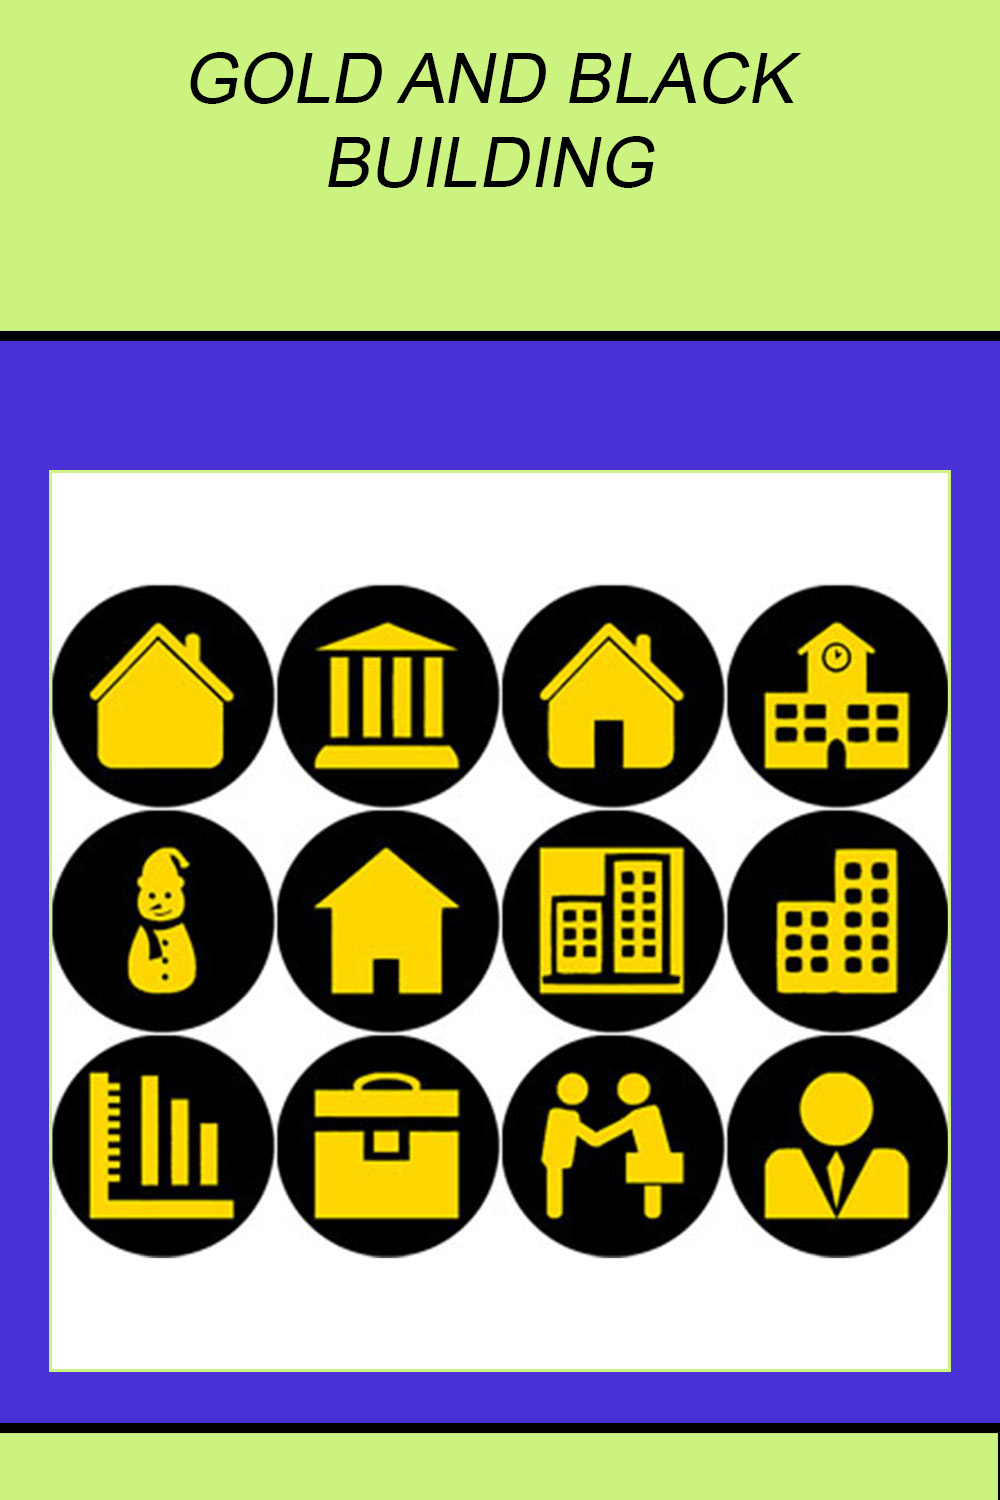 GOLD AND BLACK BUILDING ICONS pinterest preview image.